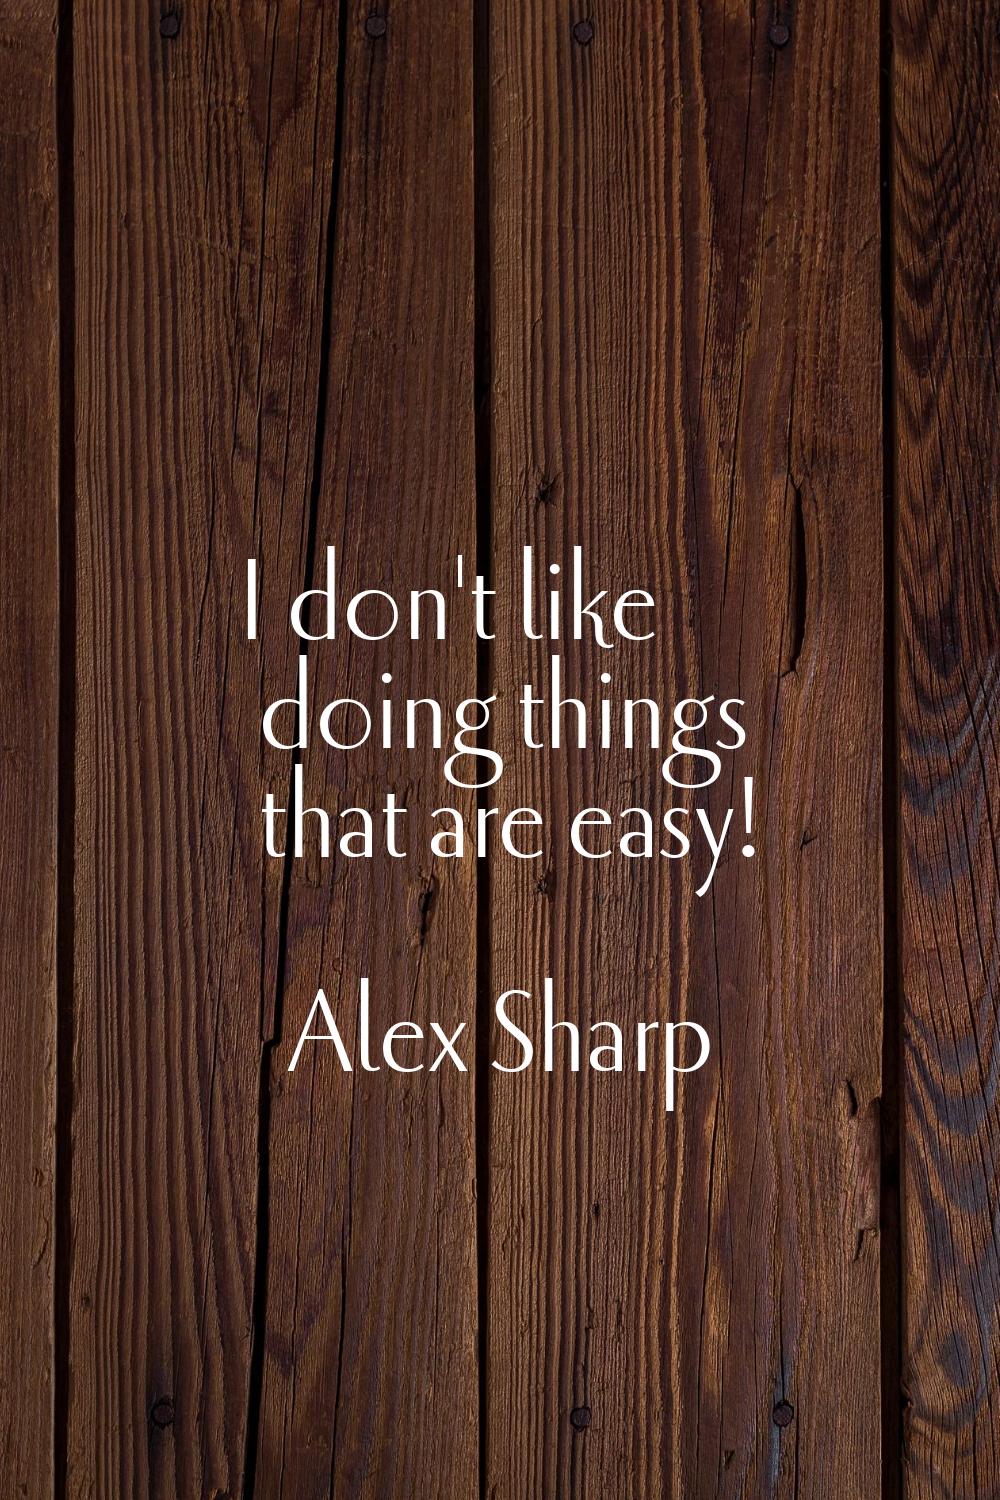 I don't like doing things that are easy!